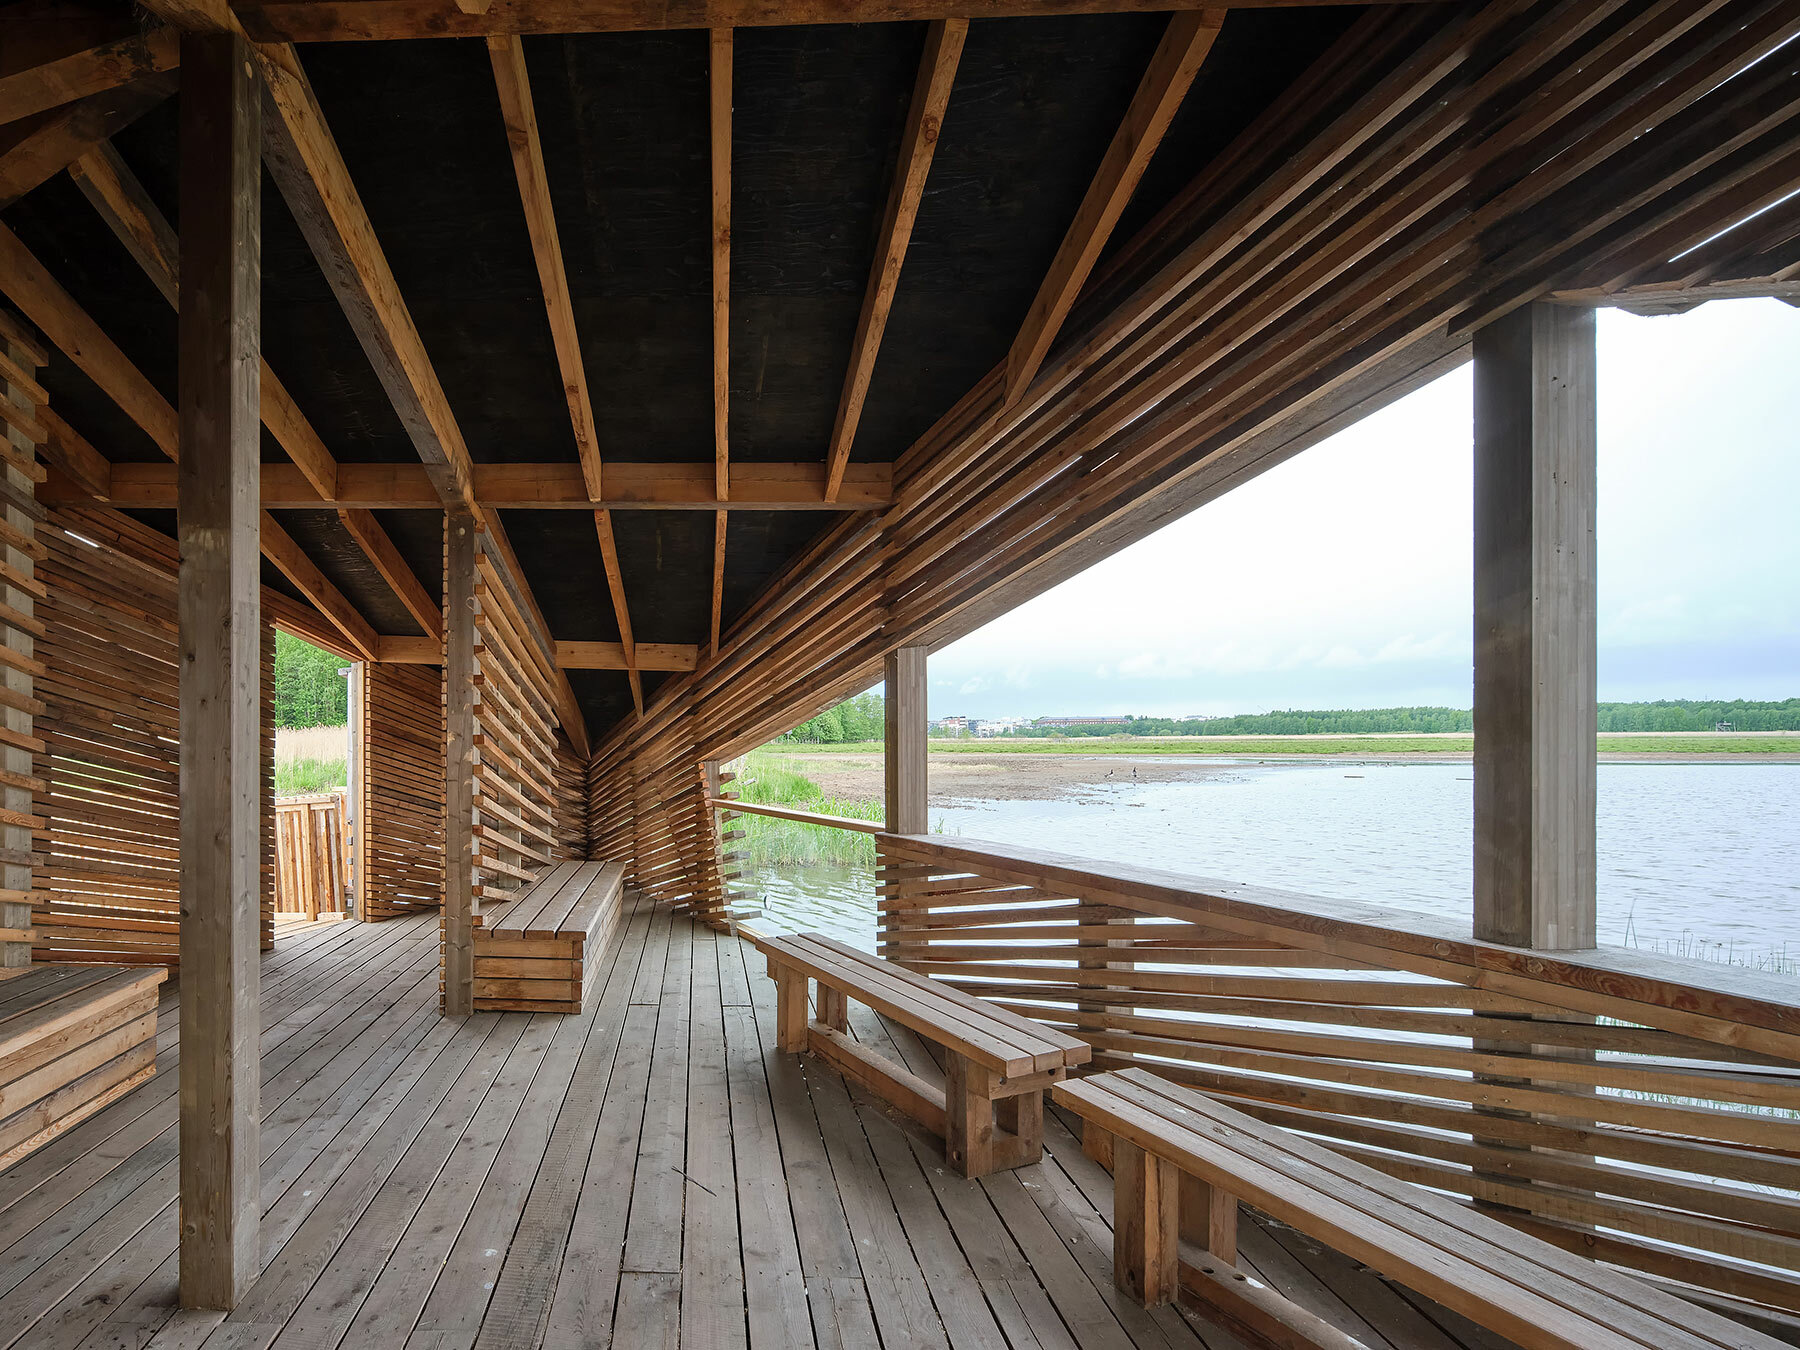 studio puisto floating designs birdwatchers in timber for finland hut